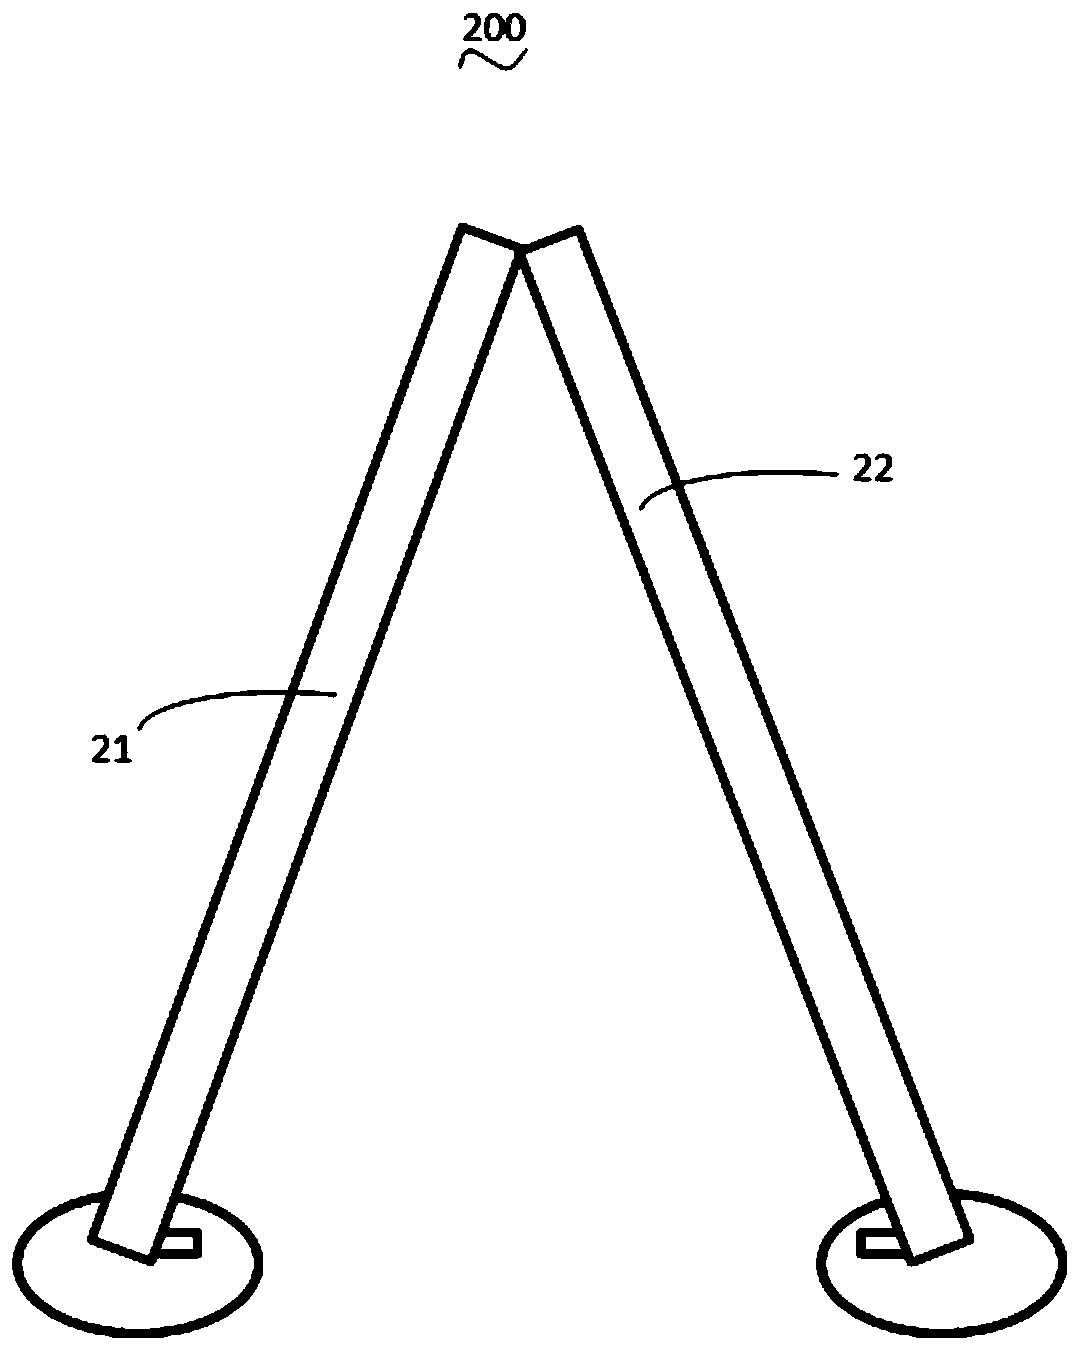 Tripod for agricultural operations